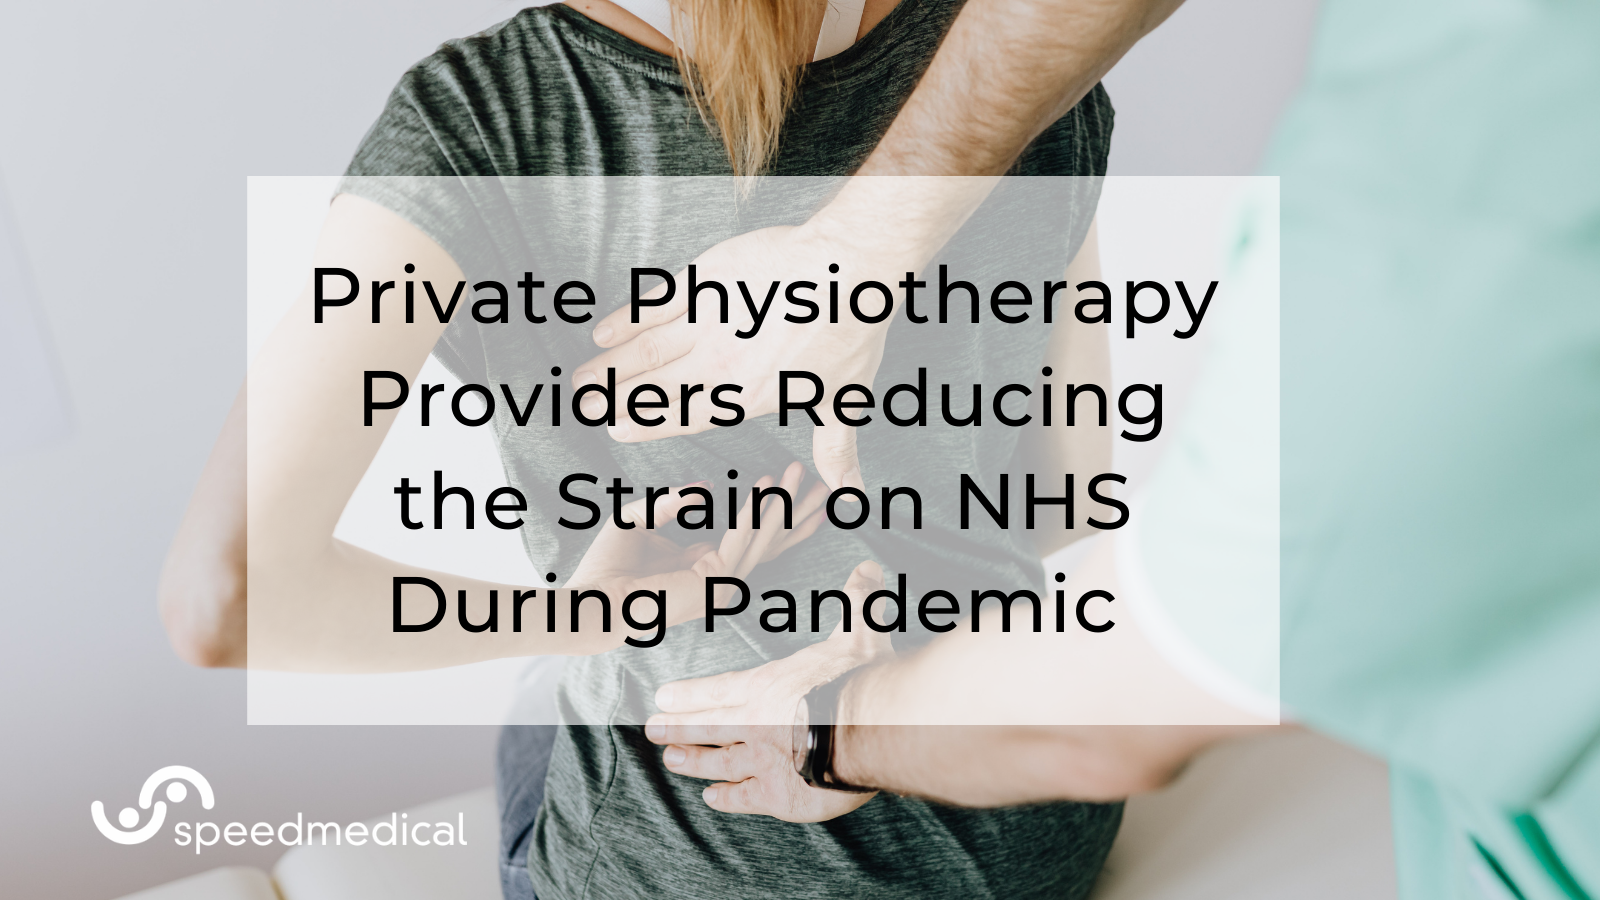 Private Physiotherapy Providers Reducing the Strain on NHS During Pandemic